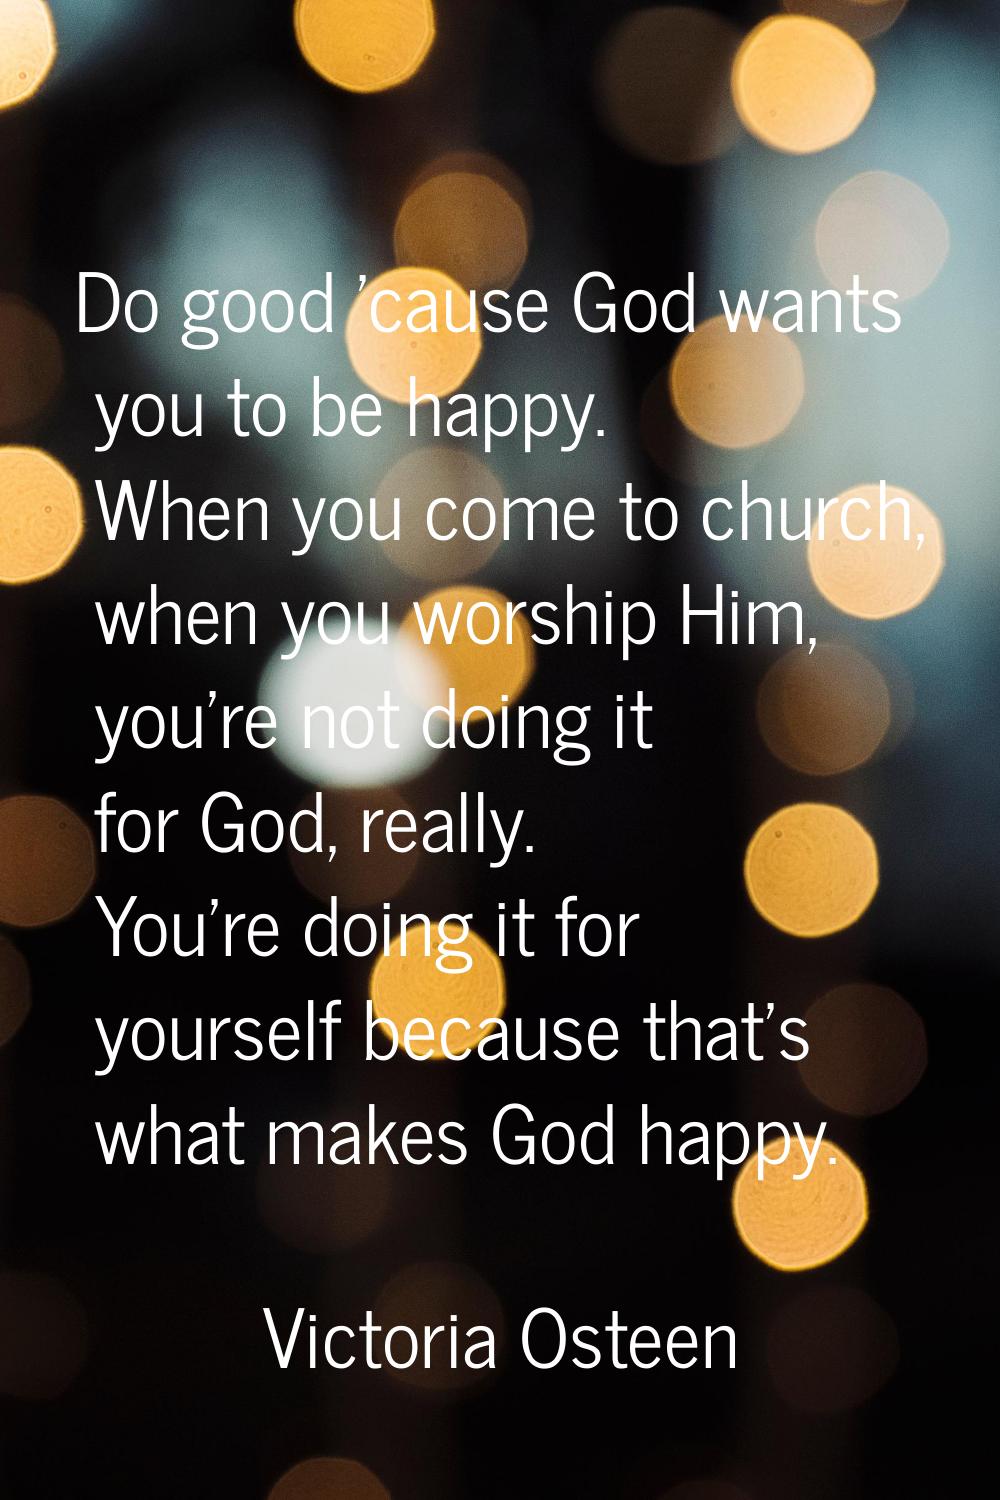 Do good 'cause God wants you to be happy. When you come to church, when you worship Him, you're not